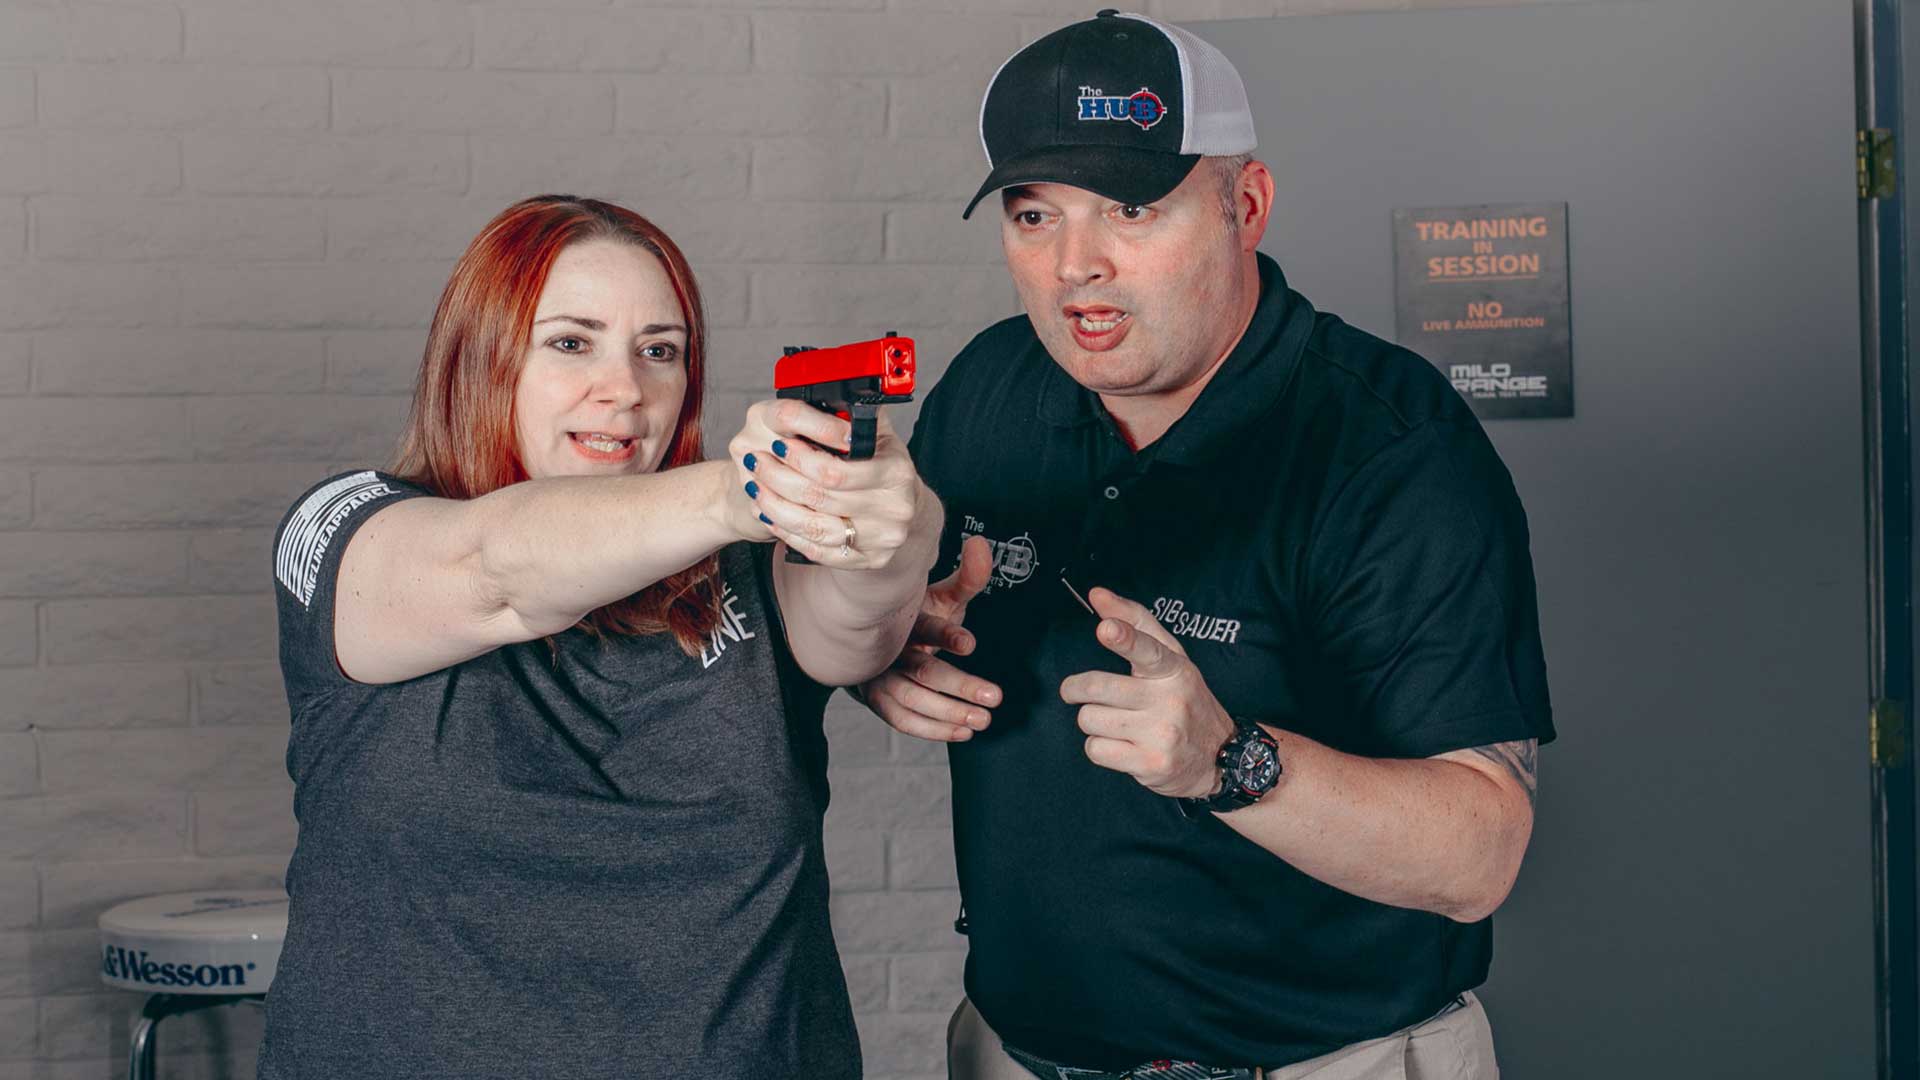 the hub mesa instructor teaching a woman how to properly fire the gun